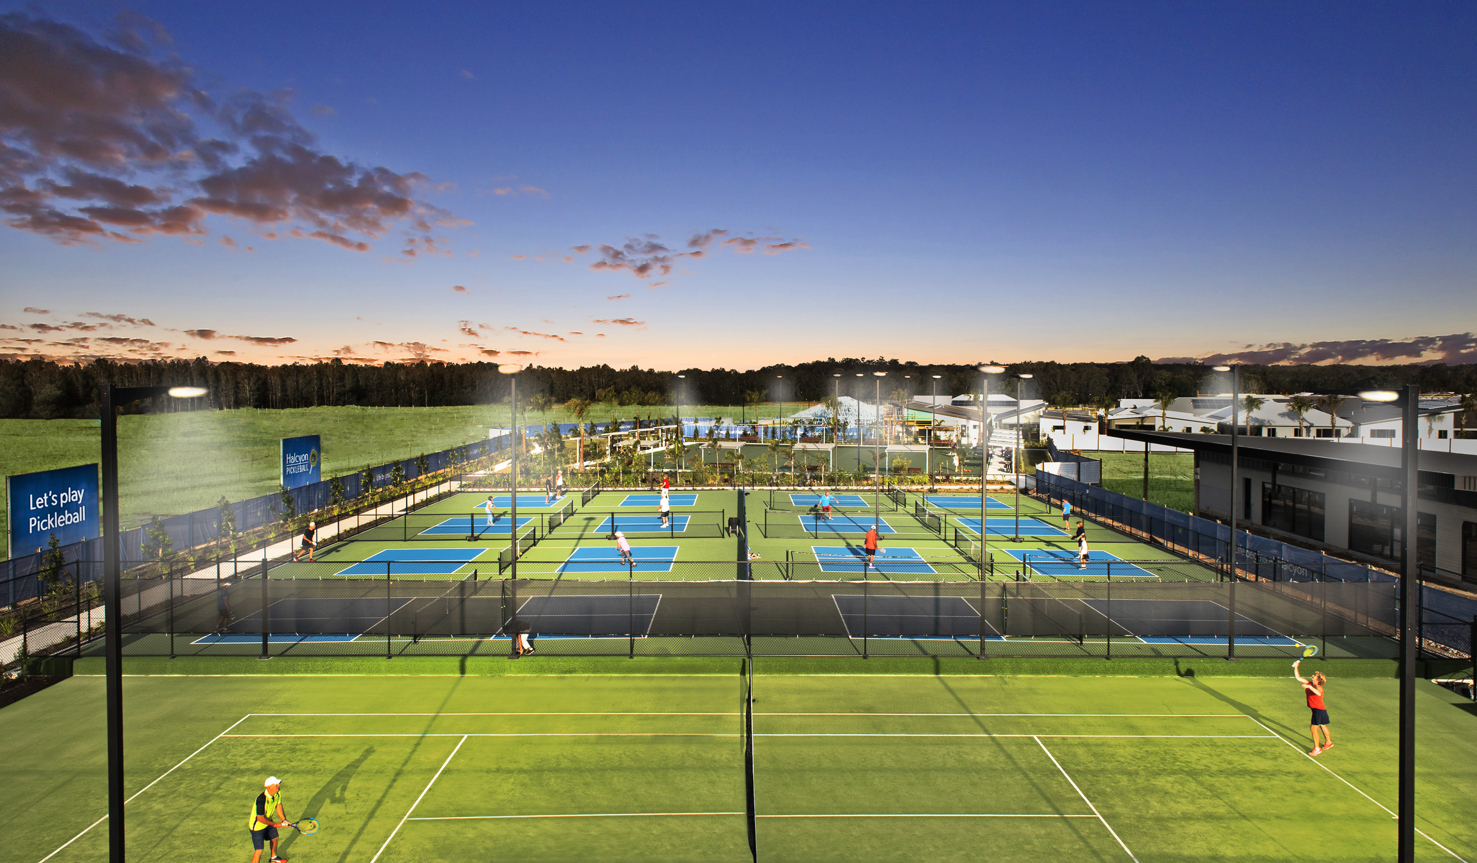 Evening drone shot of people playing on the floodlit tennis court and eight pickleball courts